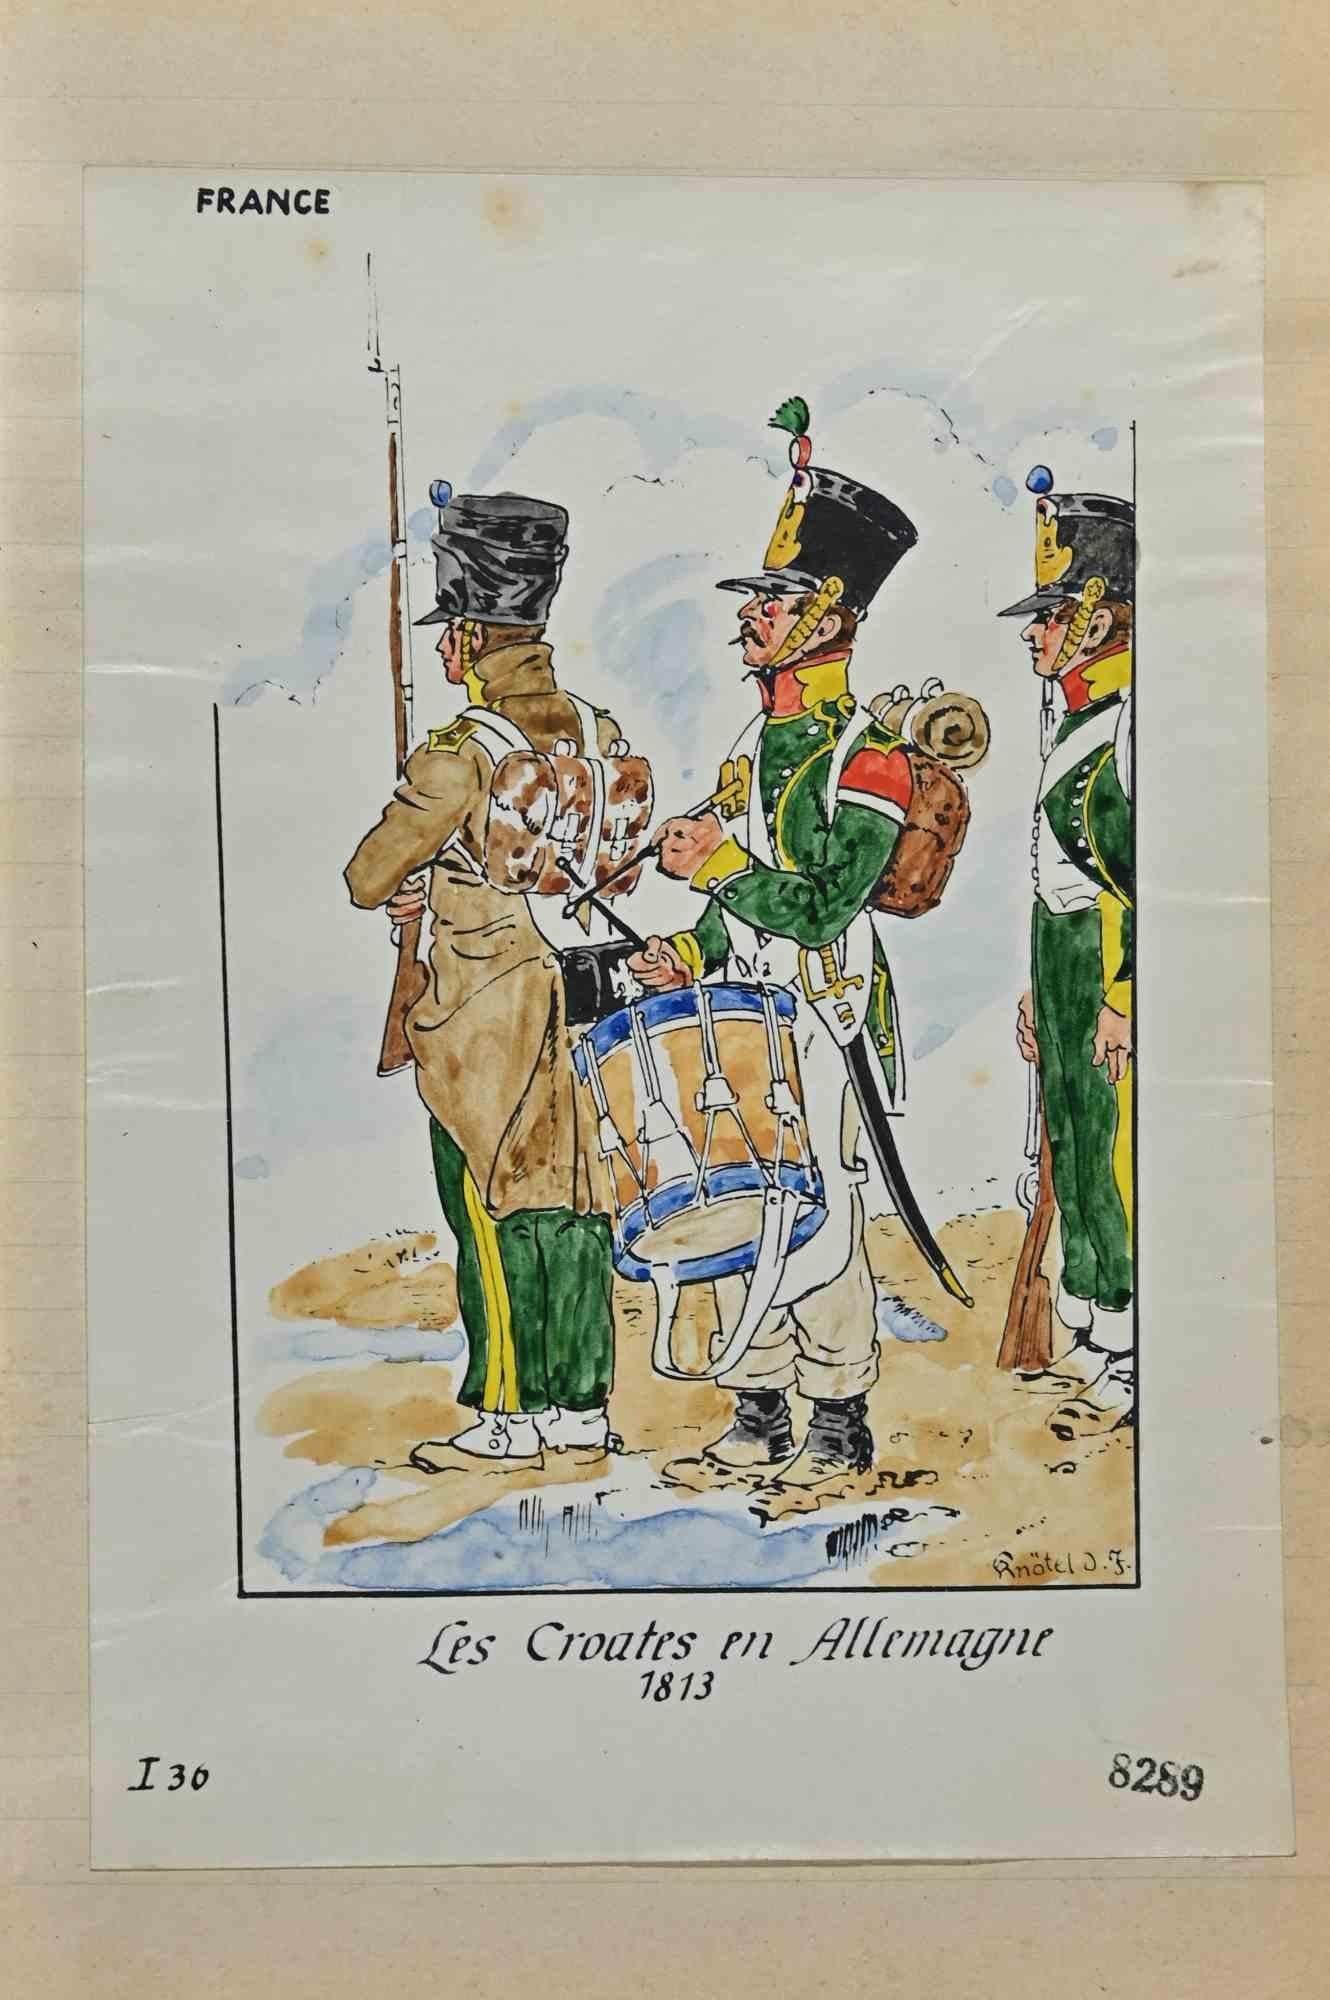 Le Croates - Original Drawing By Herbert Knotel - 1940s